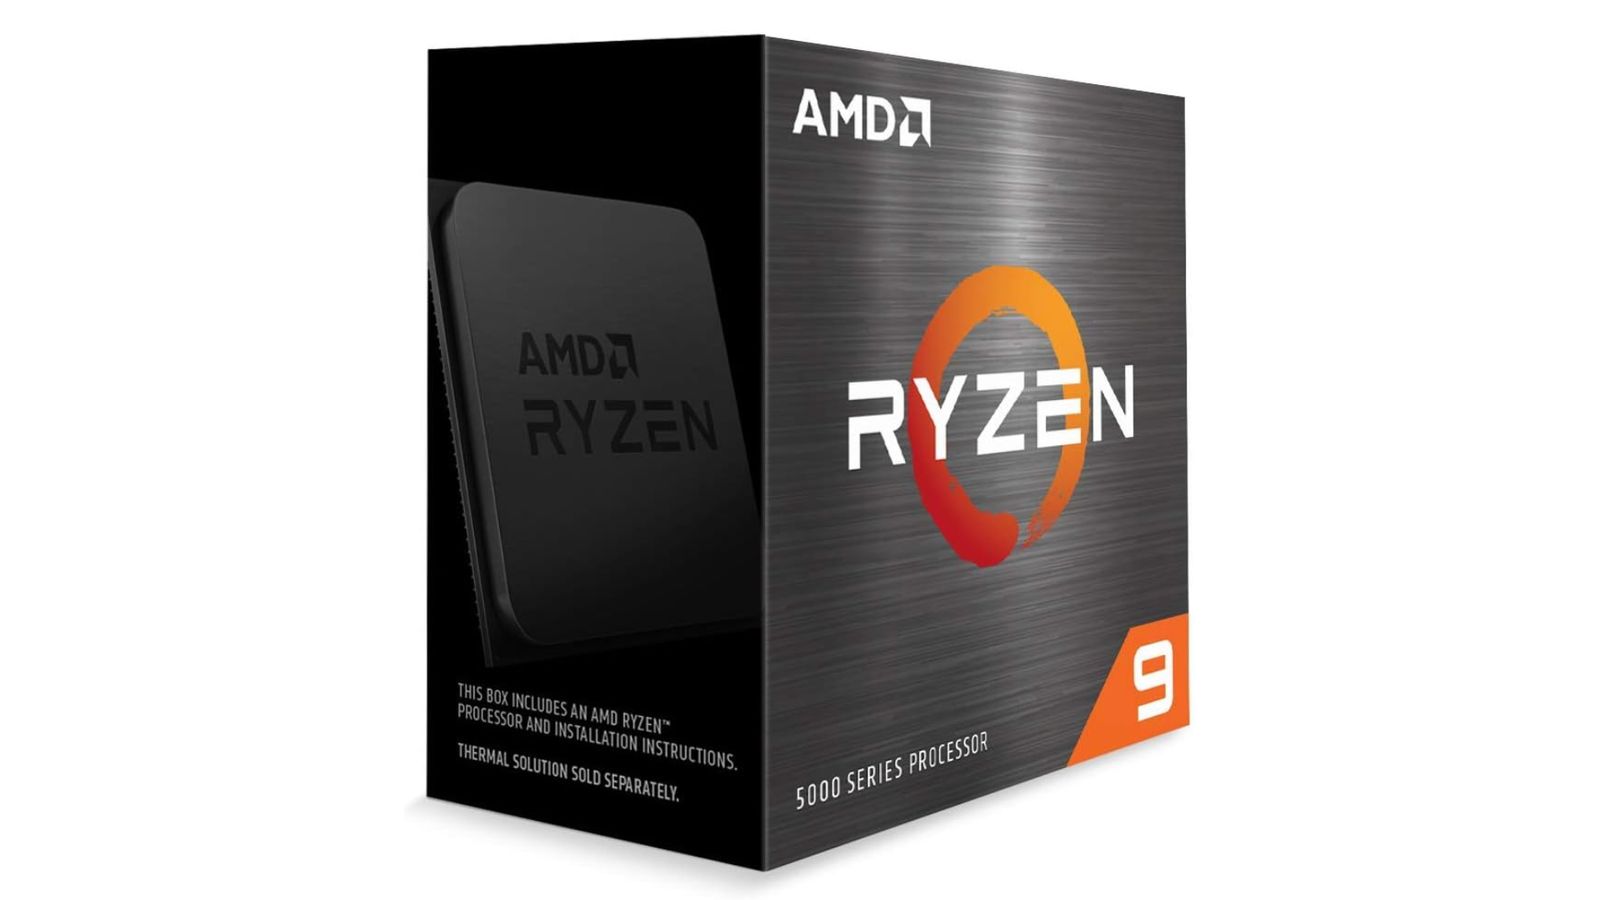 AMD Ryzen 9 5900X product image of a grey AMD Ryzen box featuring white and orange branding with a graphic of the CPU on the back.